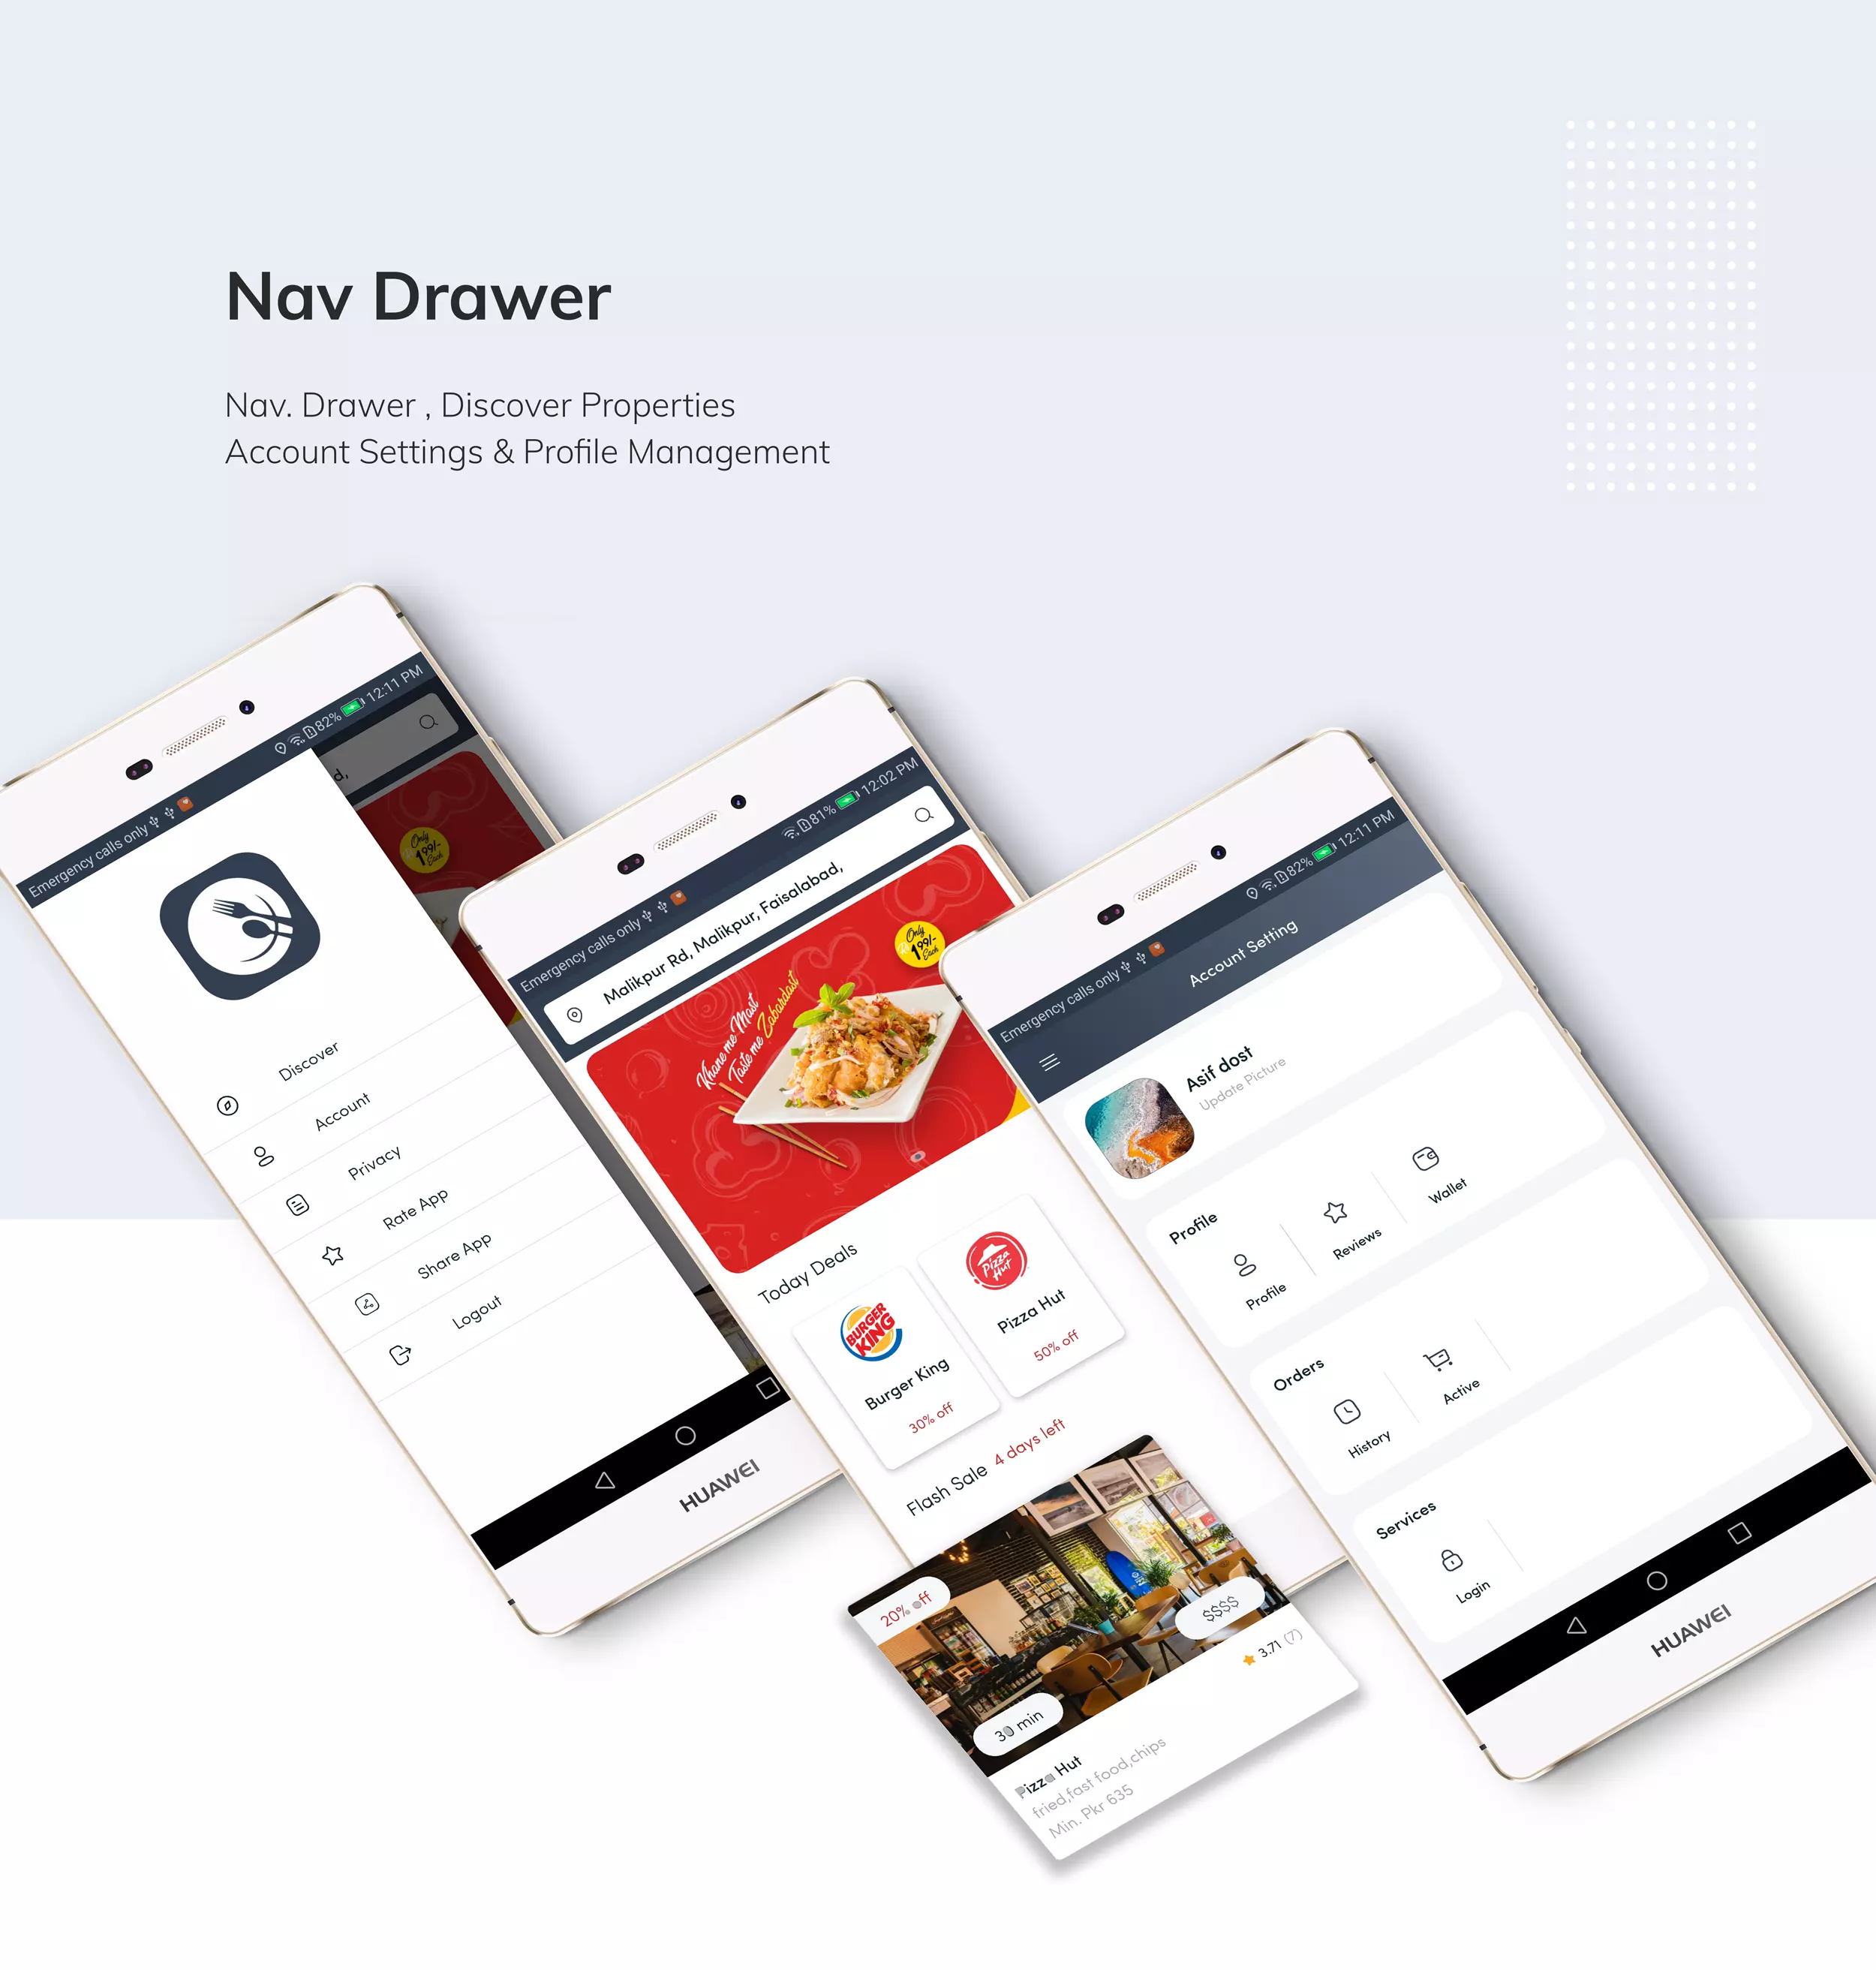 Restaurant Food Delivery App with Delivery Boy - 3